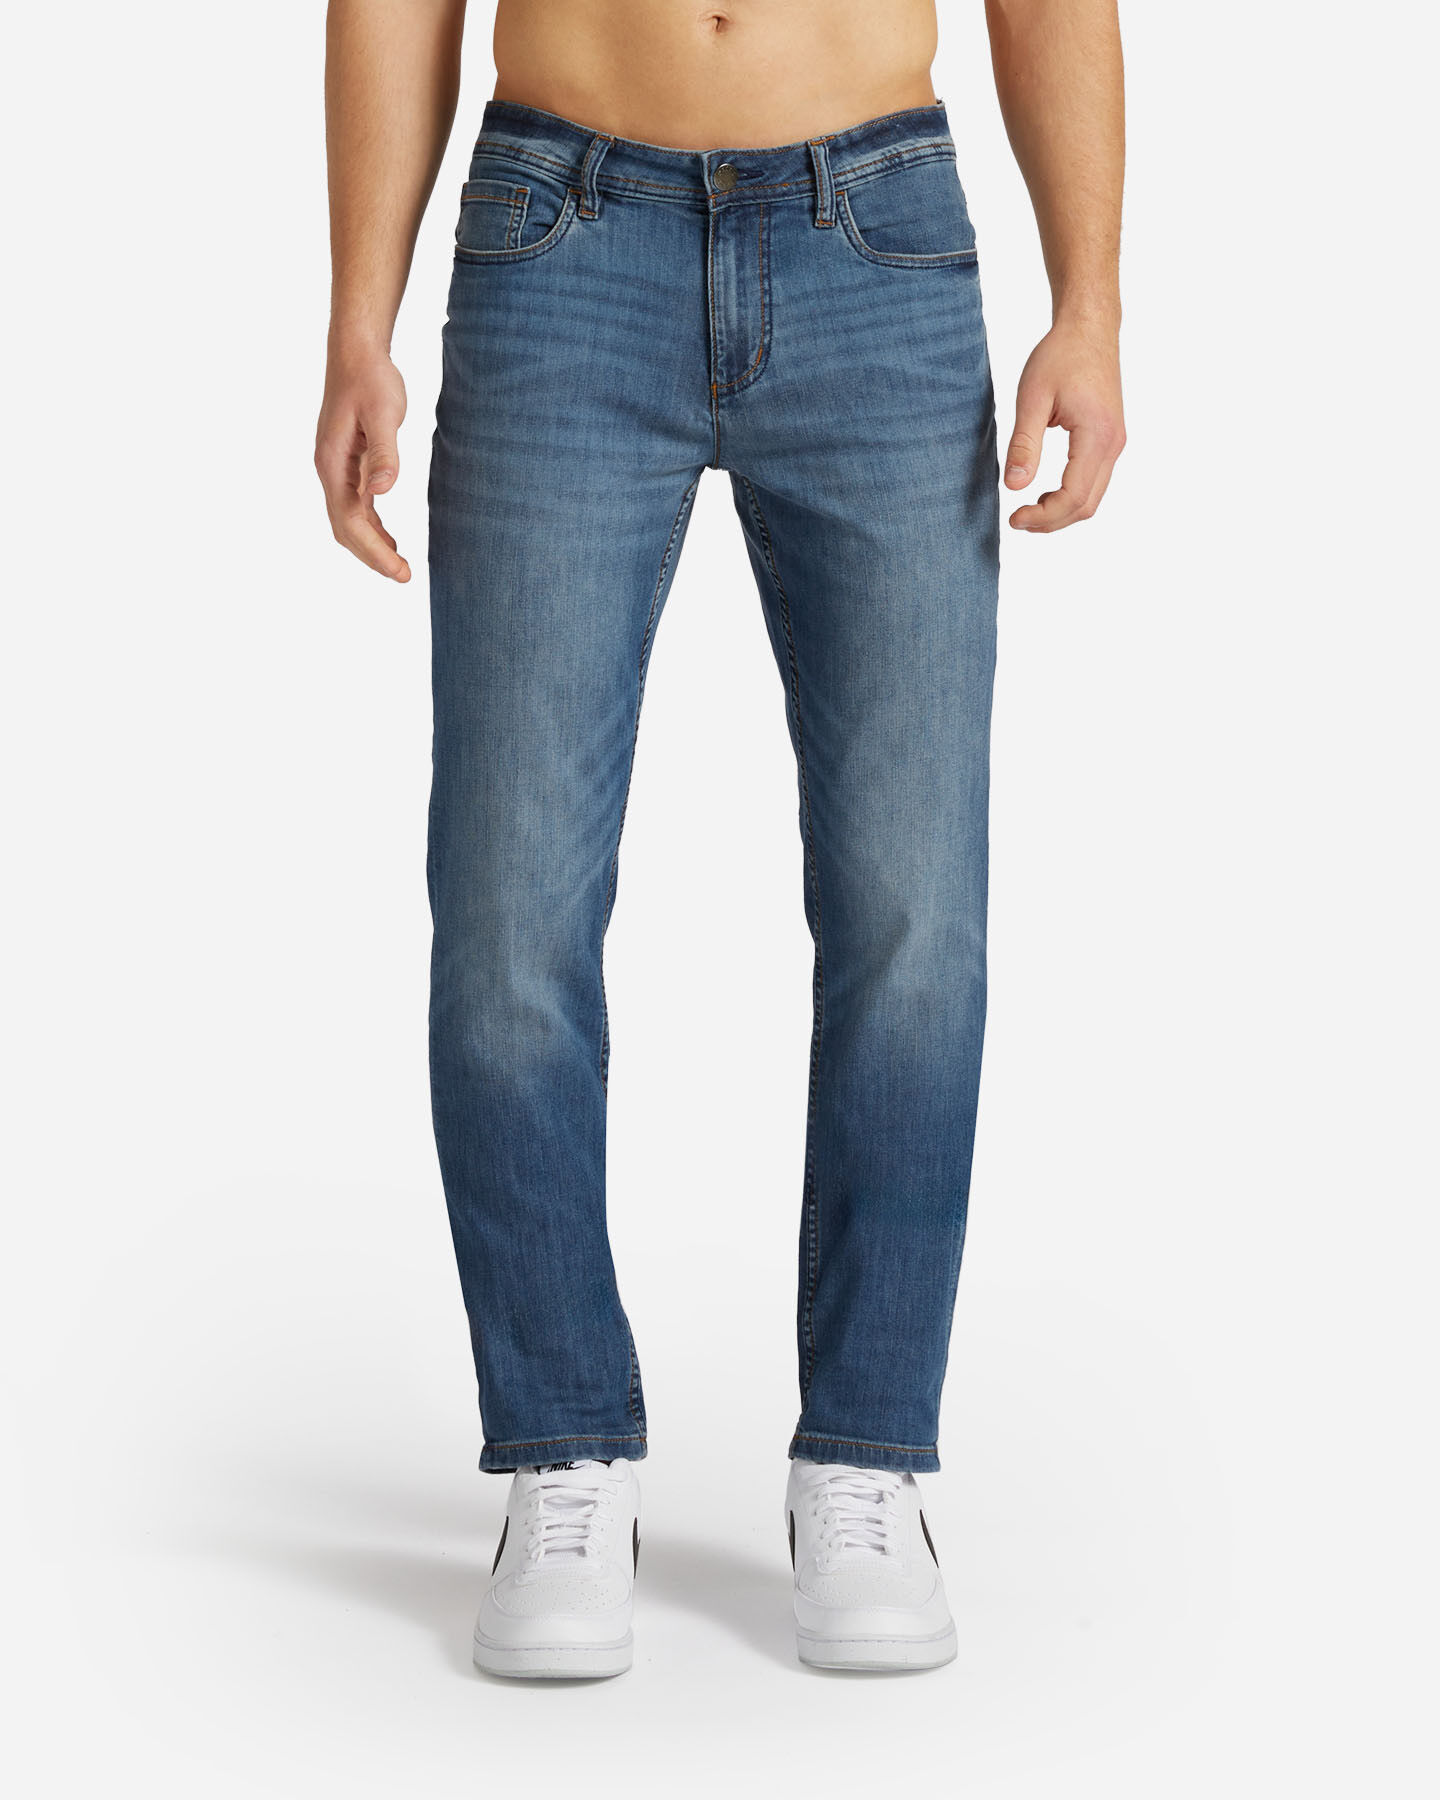  Jeans DACK'S ESSENTIAL M S4129651|MD|44 scatto 0